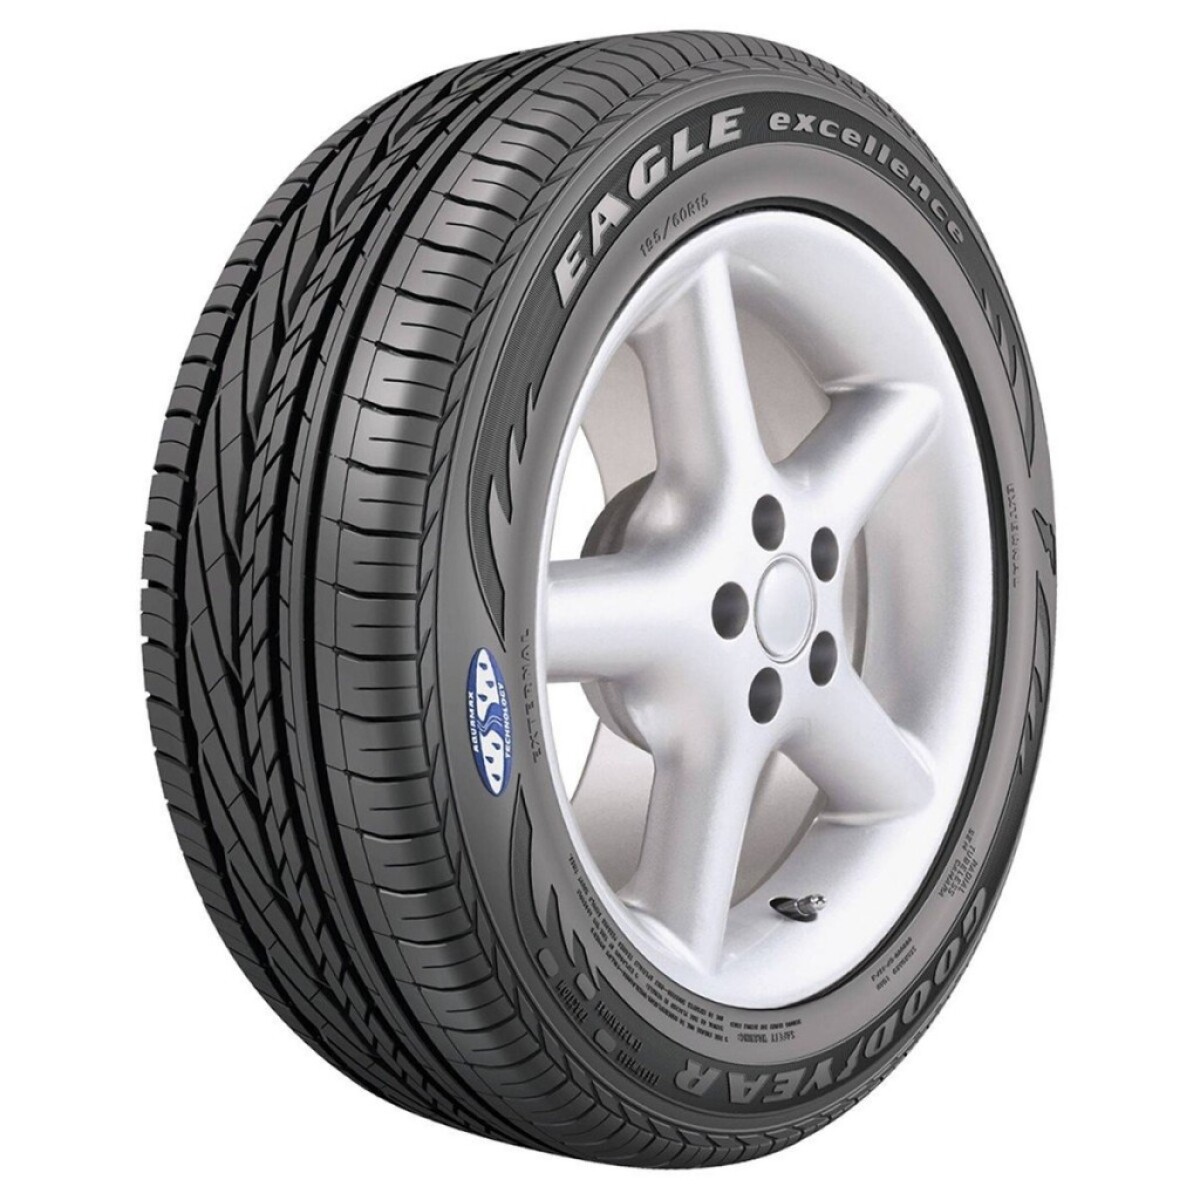 245/55 R17 EAGLE EXCELLENCE ROF 102W 